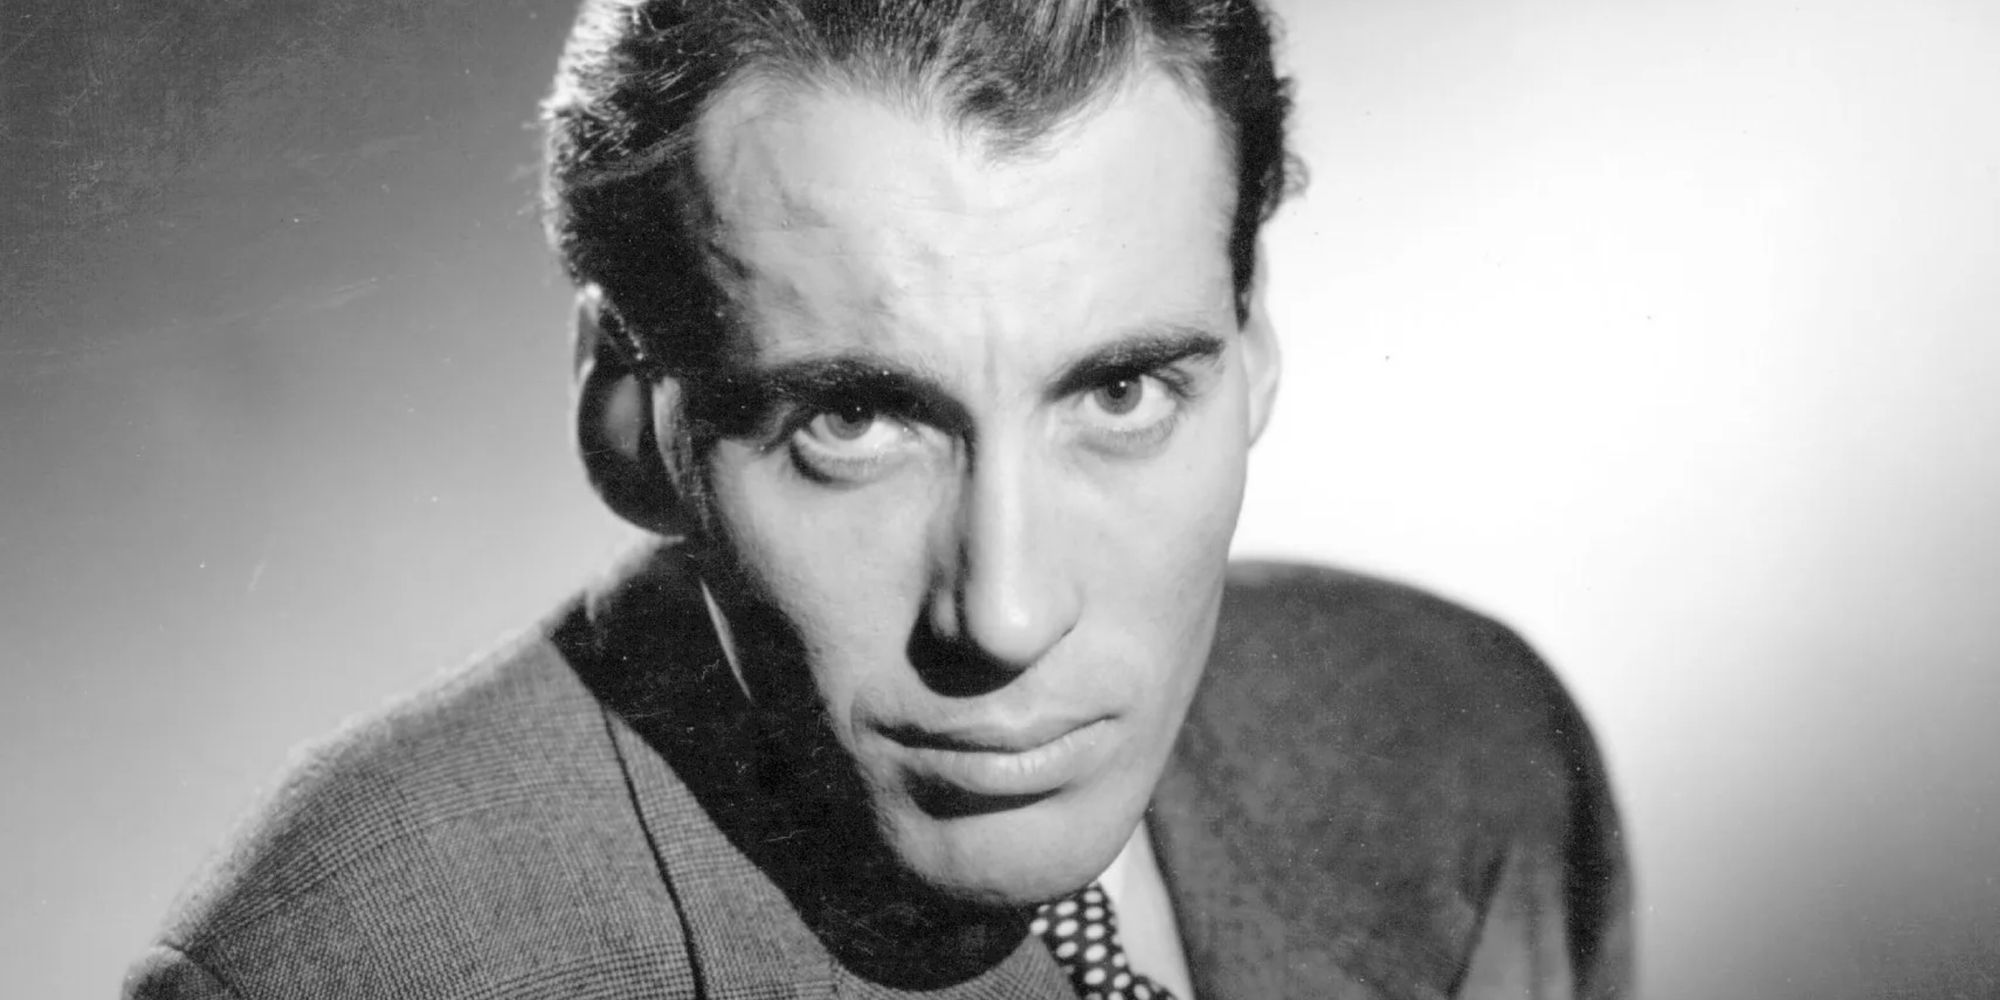 Hammer Films Star, Christopher Lee staring with his piercing eyes